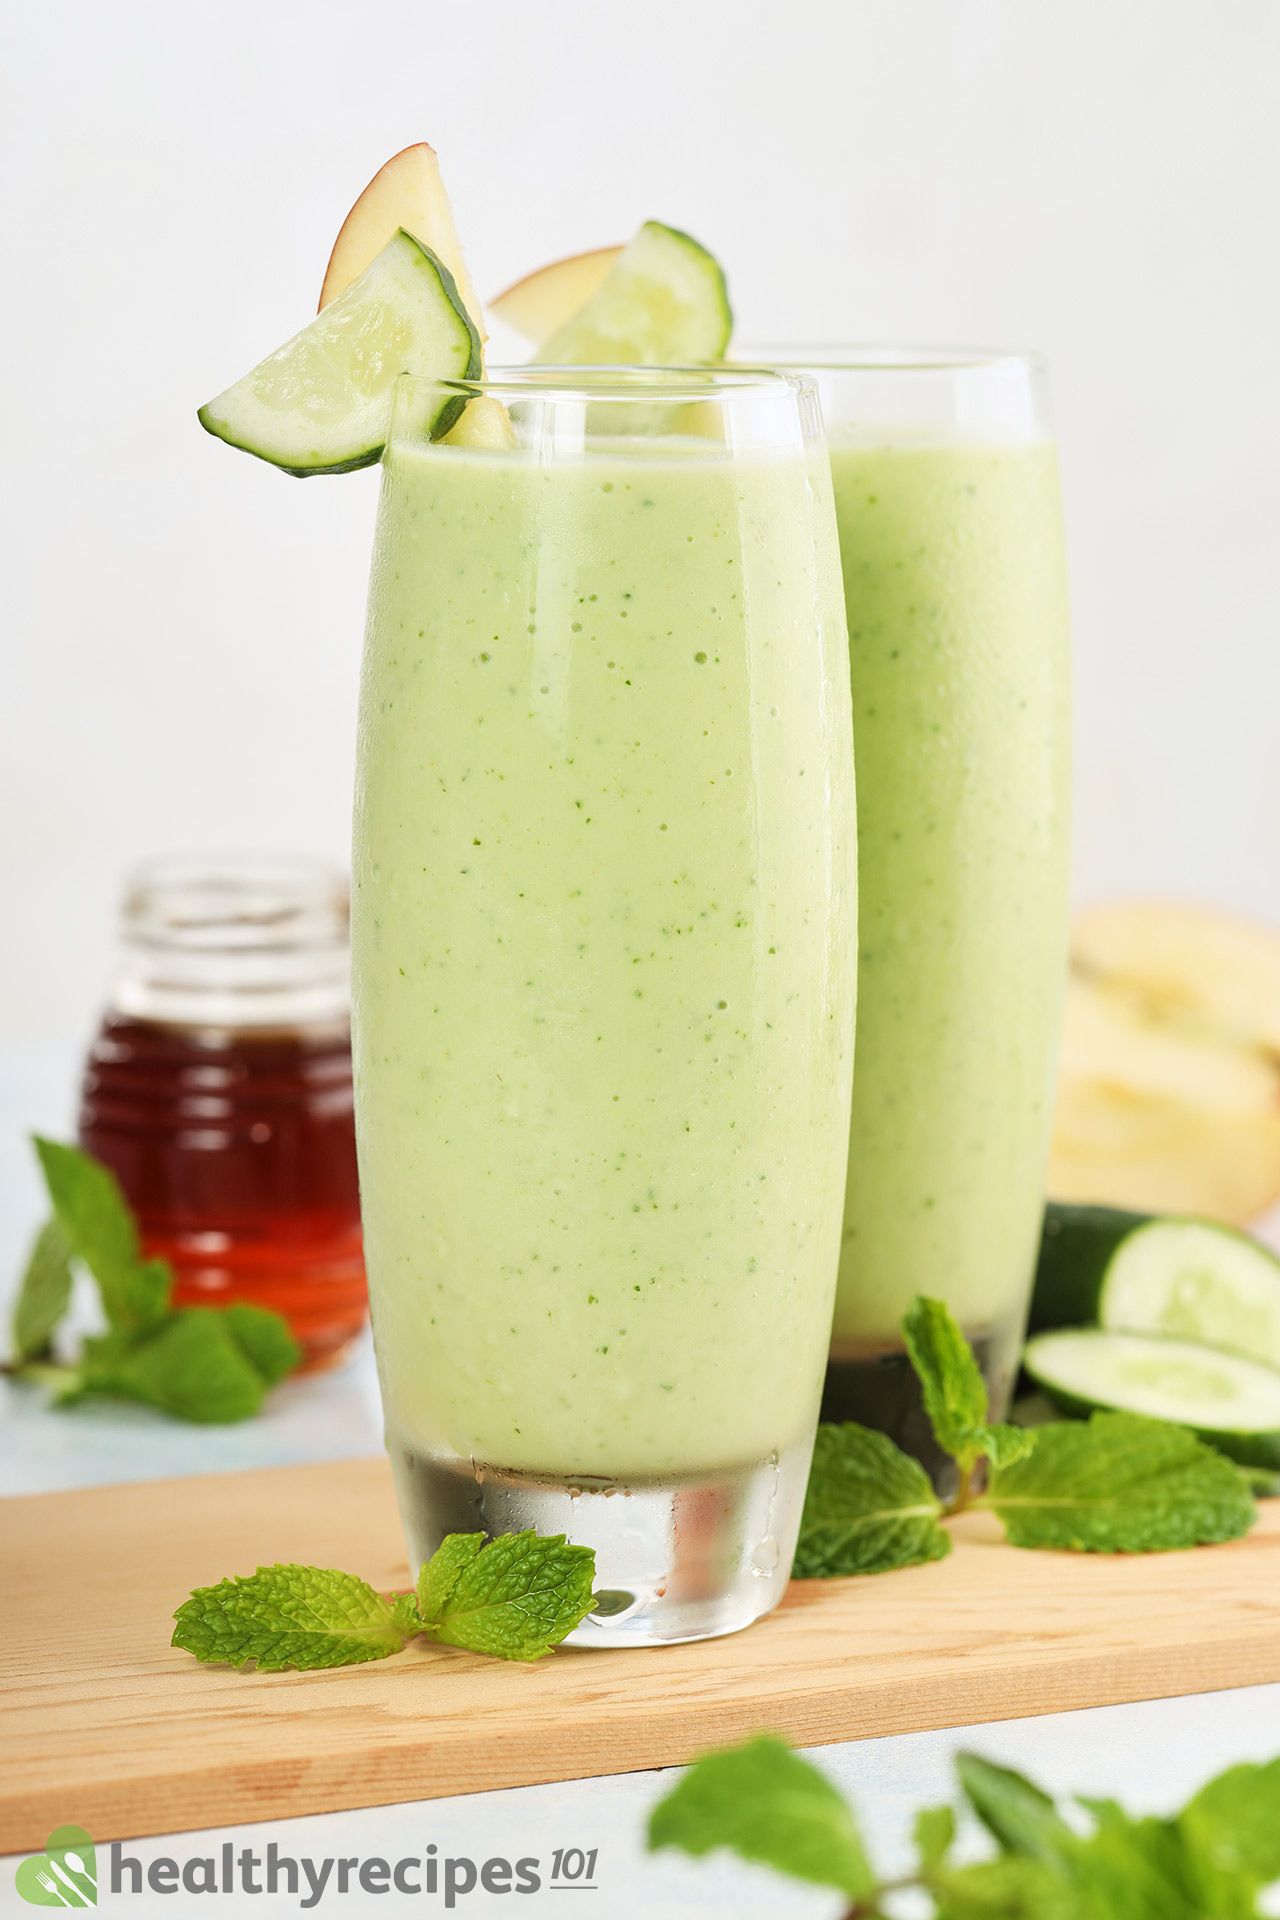 Storing and Freezing Leftover Cucumber Smoothie